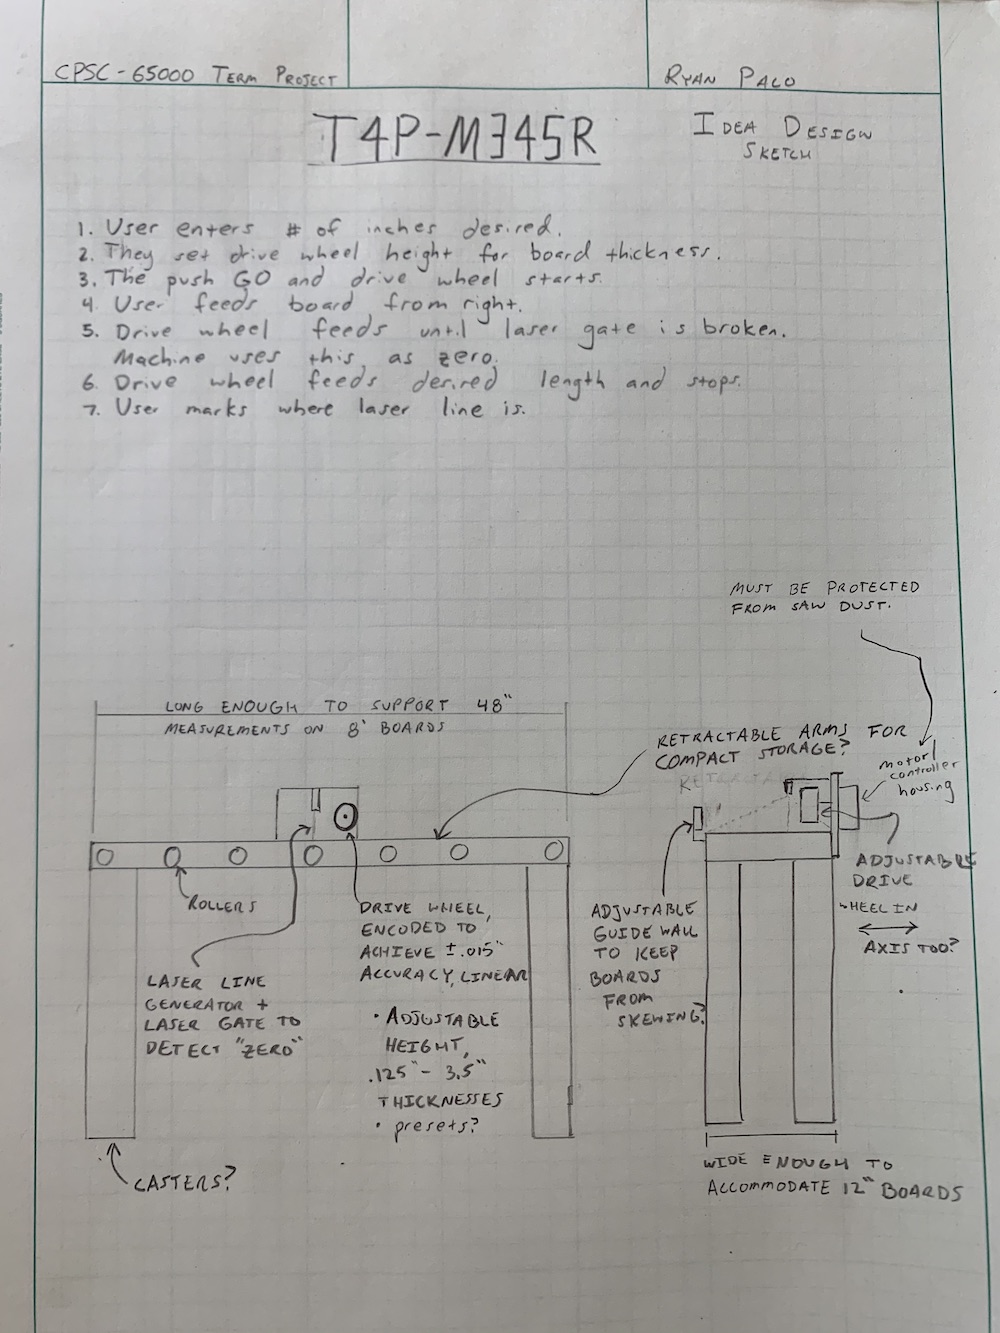 My initial design sketch showing my first thoughts for requirements.